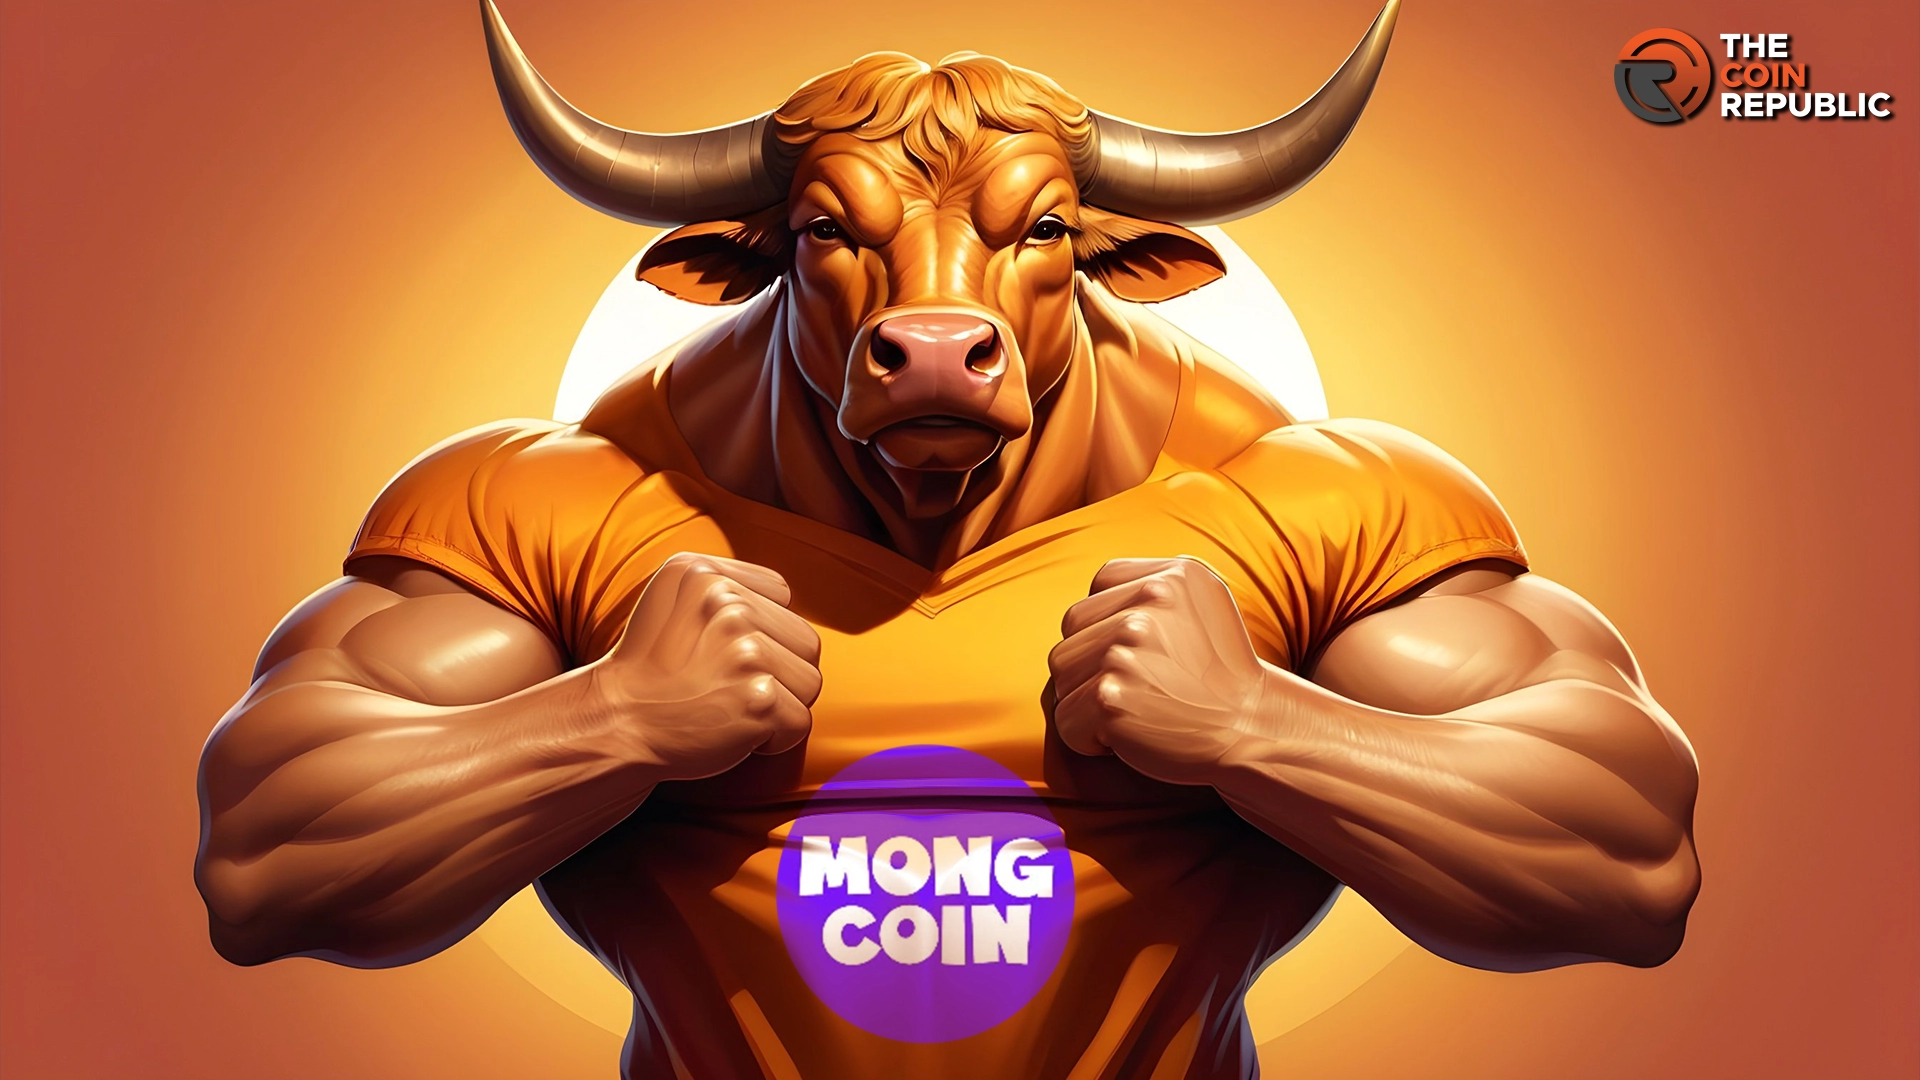 Mong Coin In Bearish Mode, Can It Swap The Play To Bullish Mode?